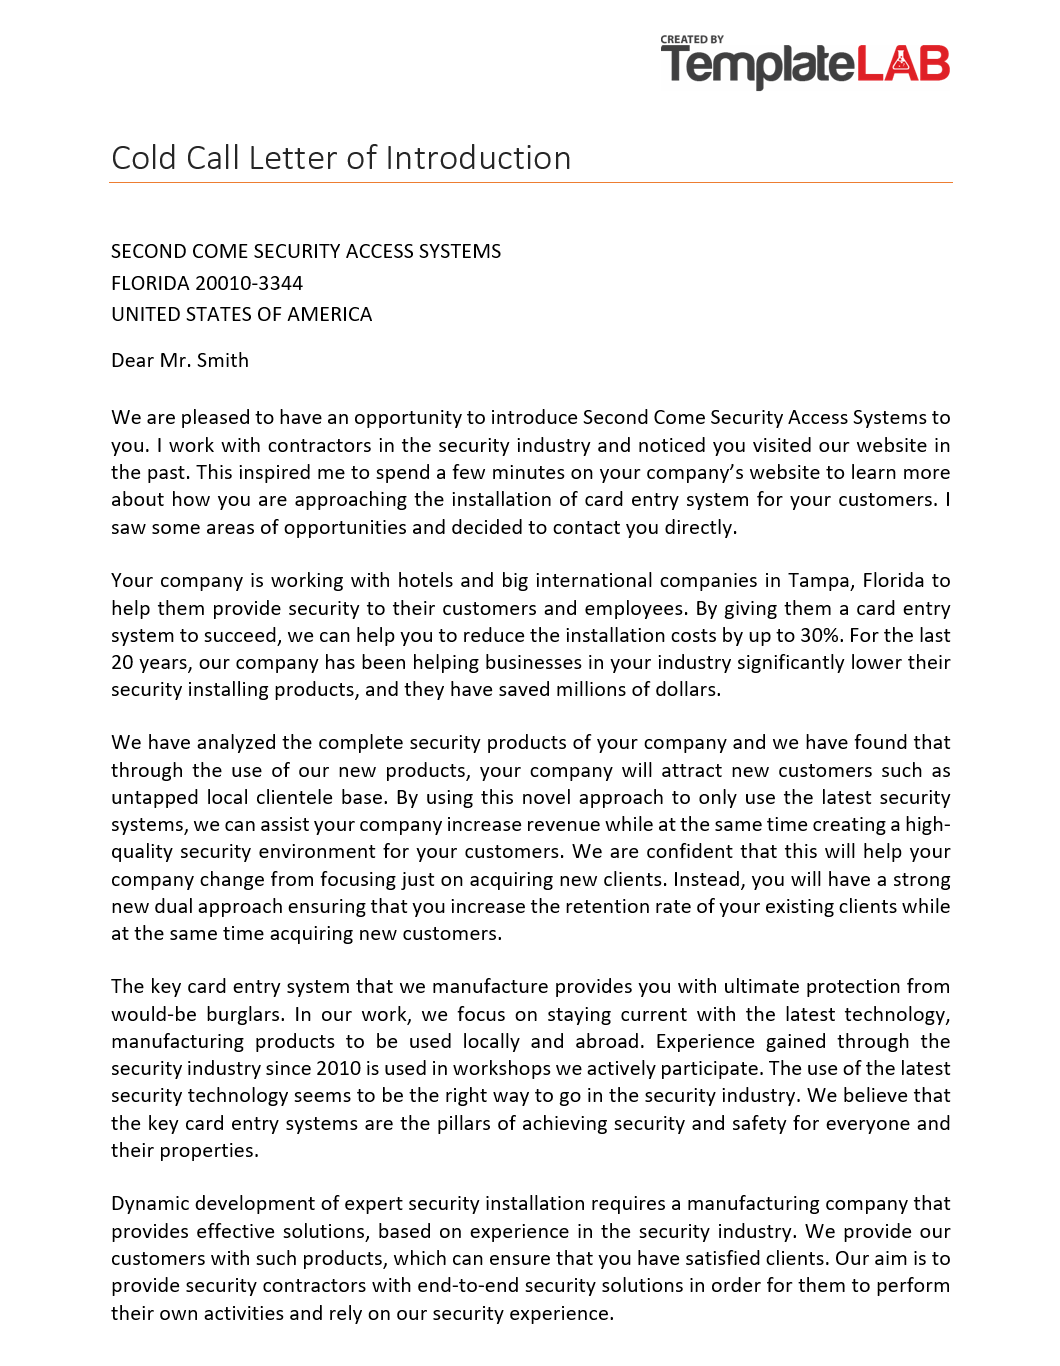 Letter self to clients introduction Introductory Letter